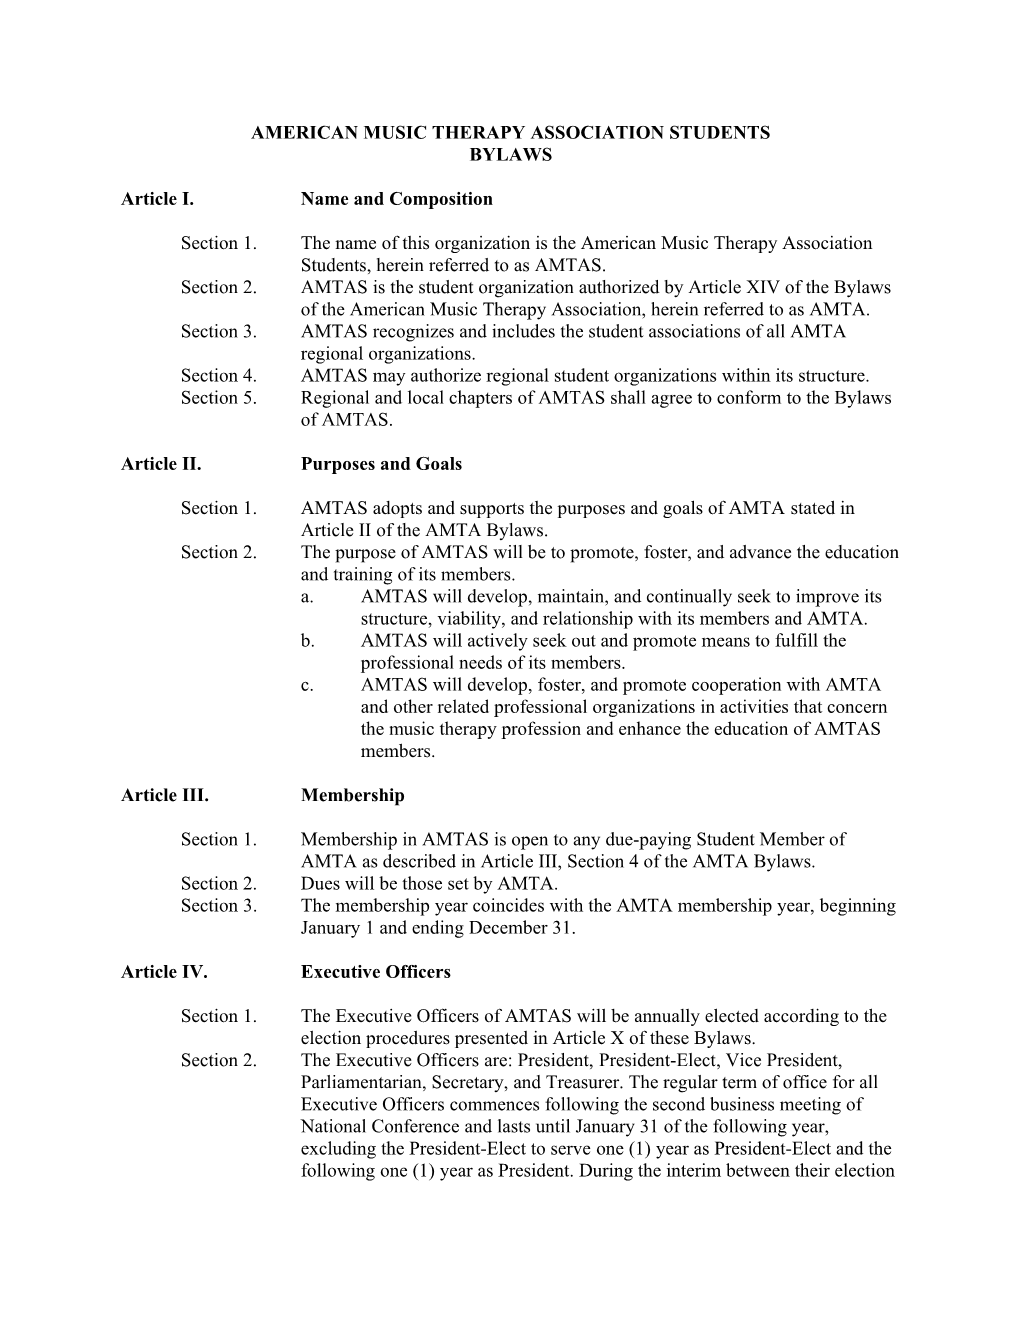 Proposed 2006 Revisions of Amtas Bylaws